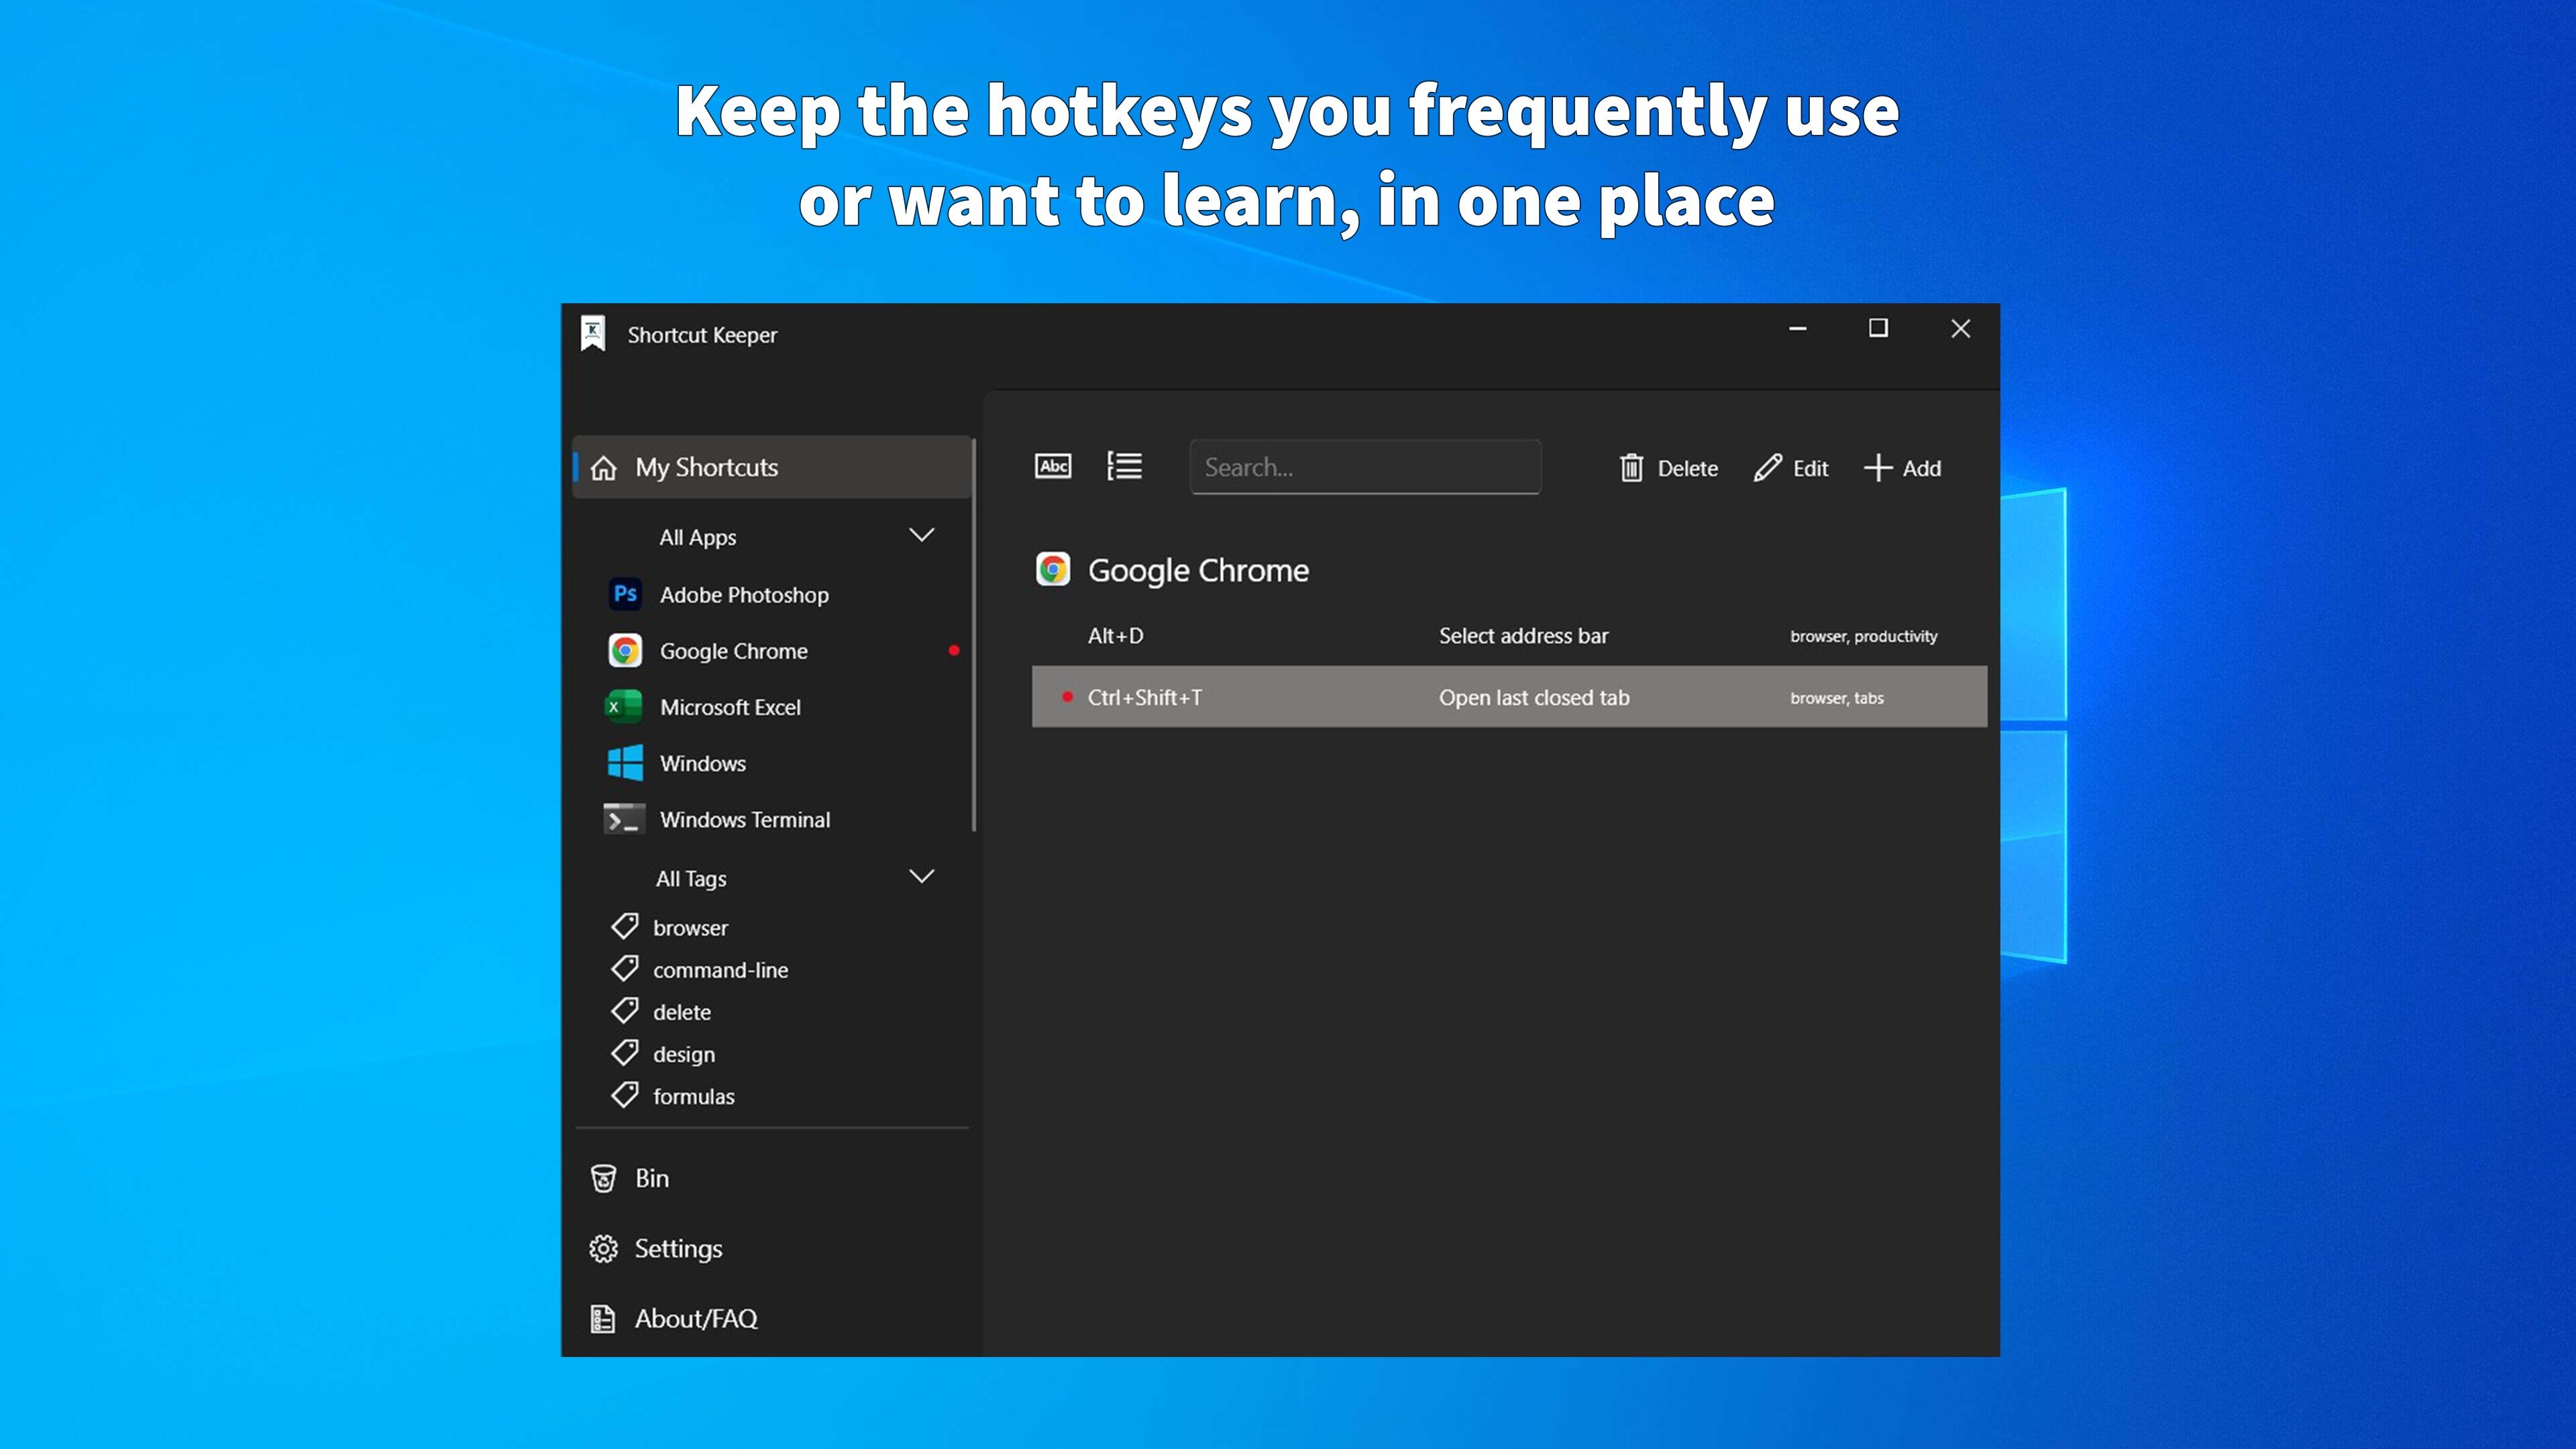 Keep the hotkeys you frequently use or want to learn, in one place